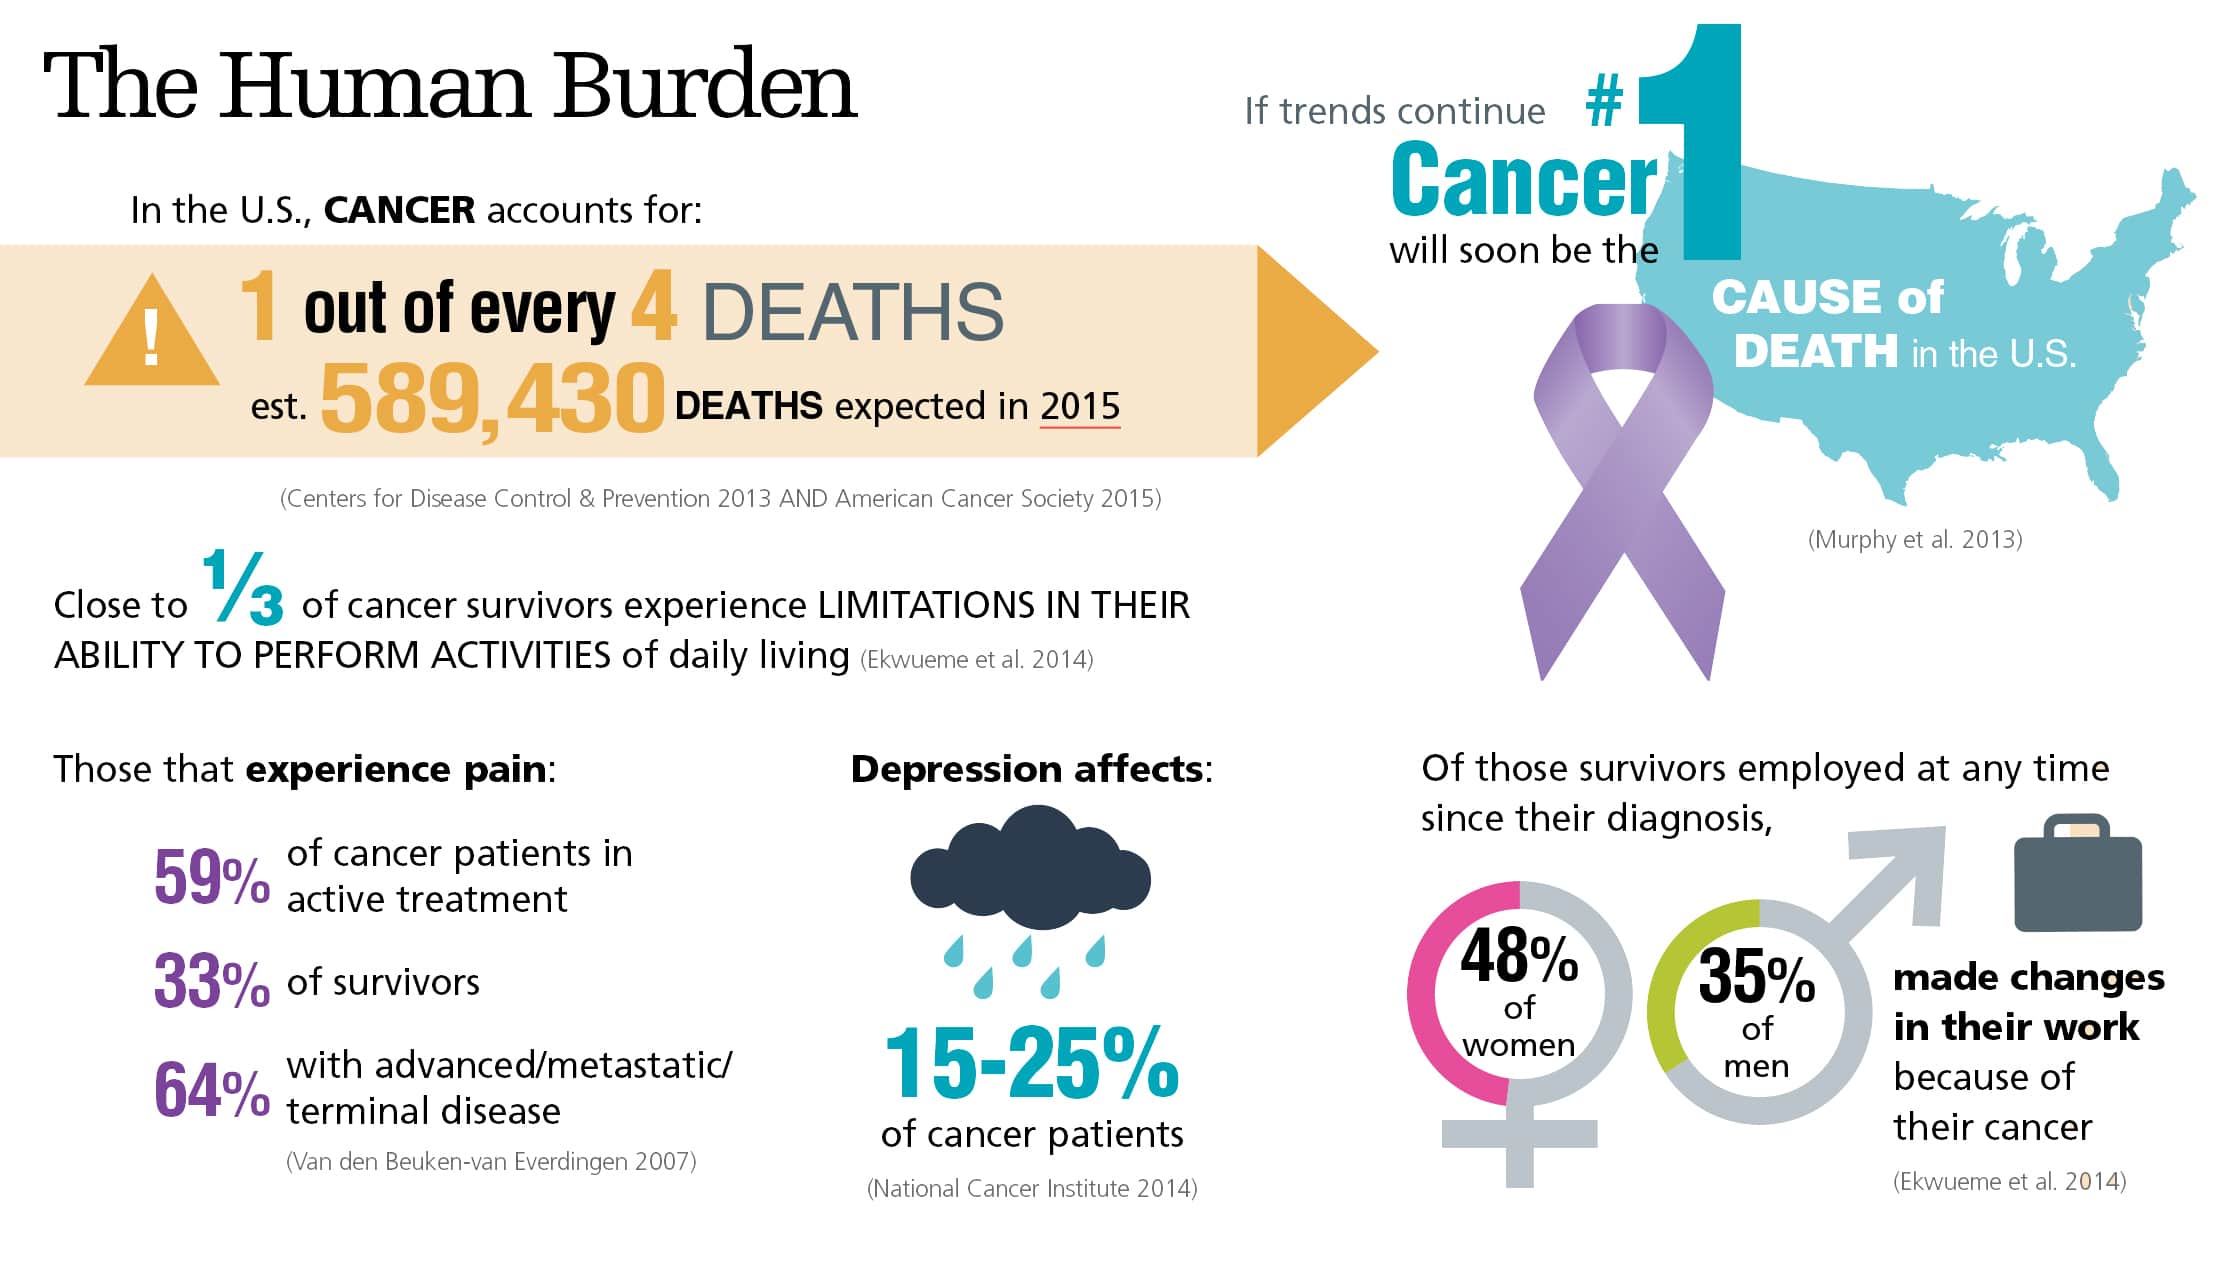 Infographic on the human burden of cancer